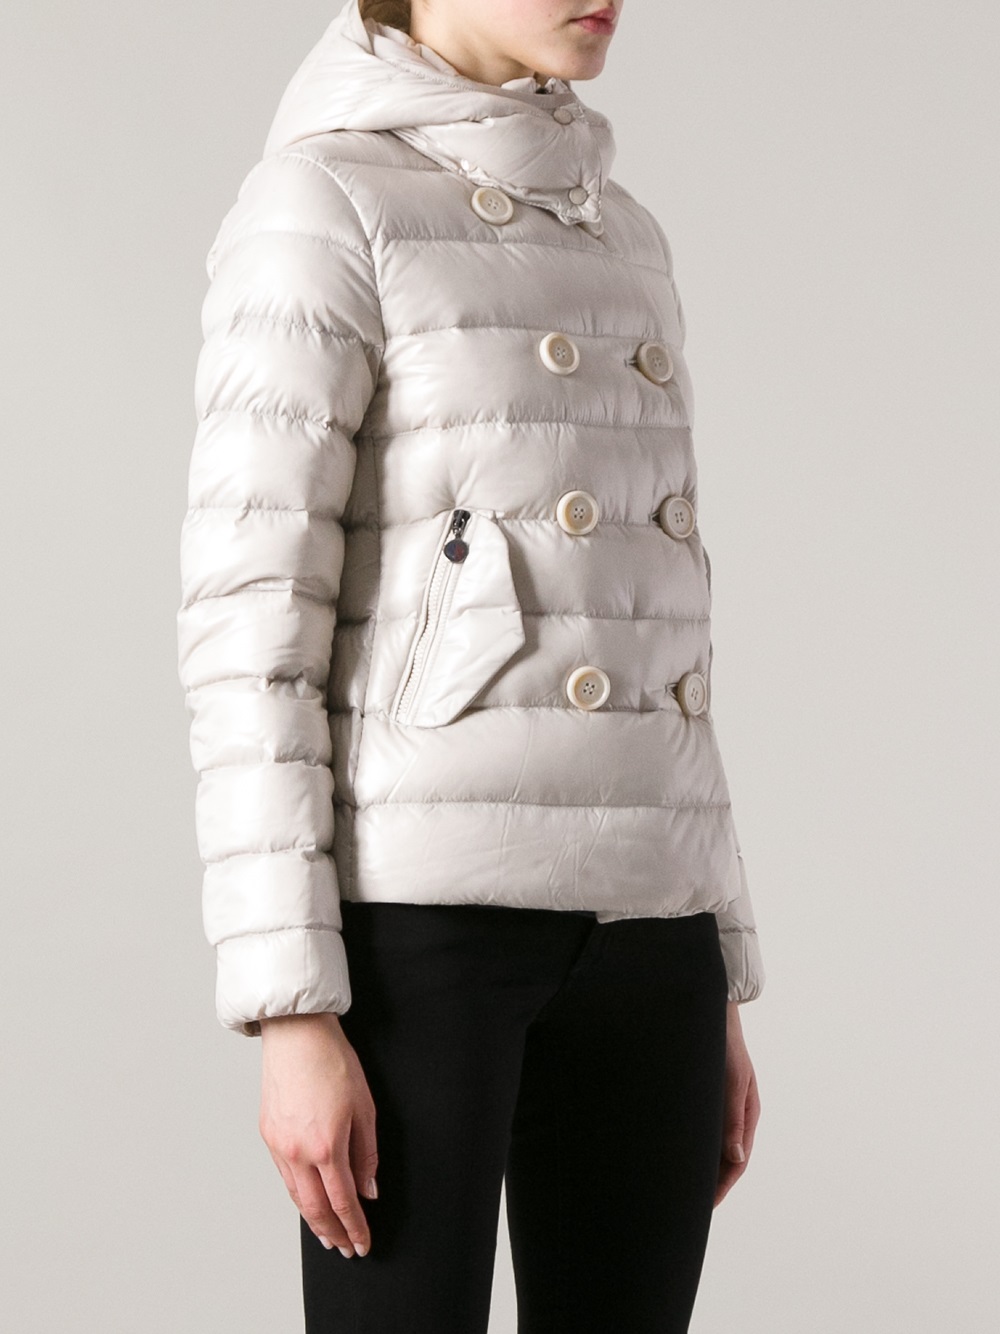 Lyst - Moncler Plane Jacket in White